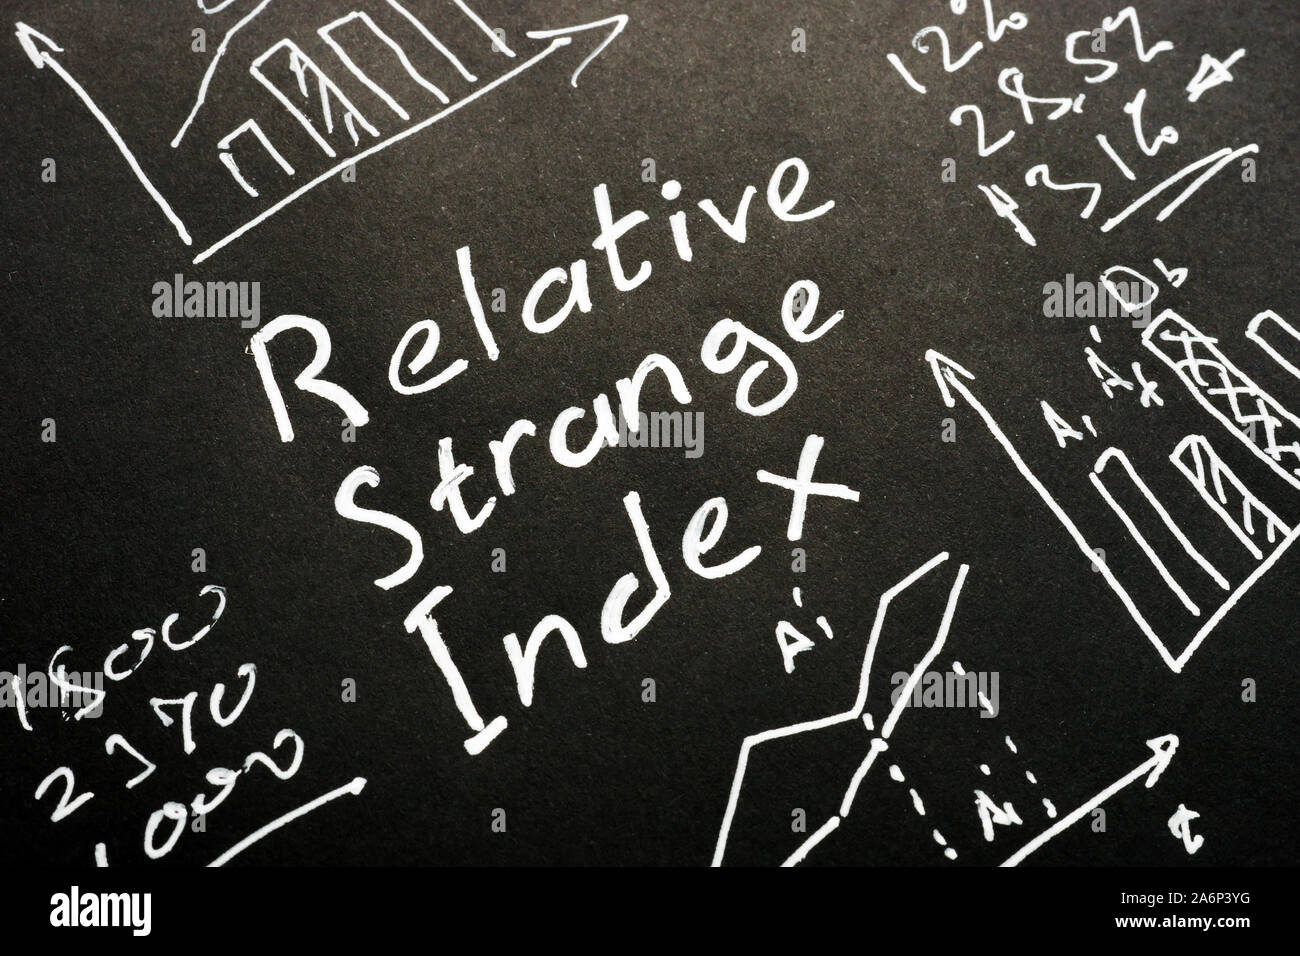 RSI - Relative Strength Index inscription, graphs with business data. Stock Photo